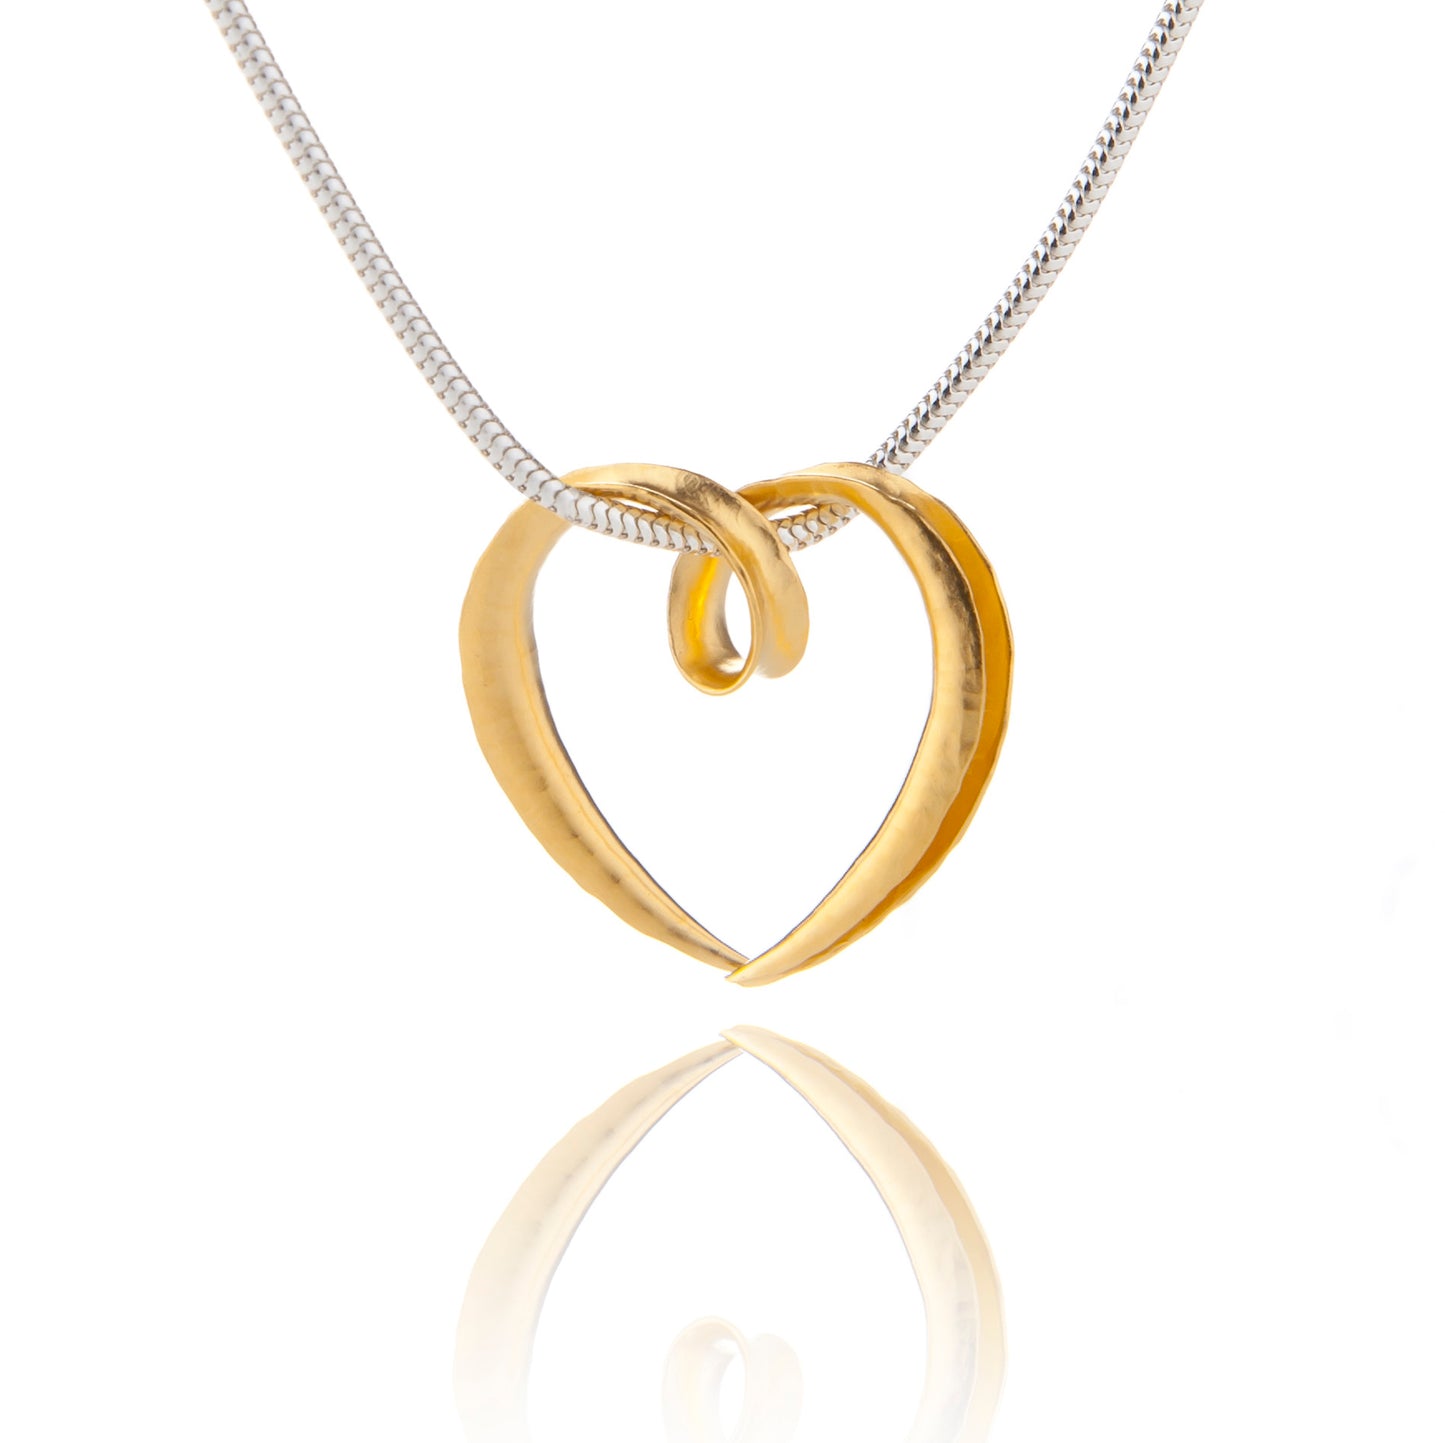 A small silver heart pendant made from a single piece of metal, formed into a sort of tube with the outer side open and gold plated all over. It is formed into a loop at the top which the chain passes through.